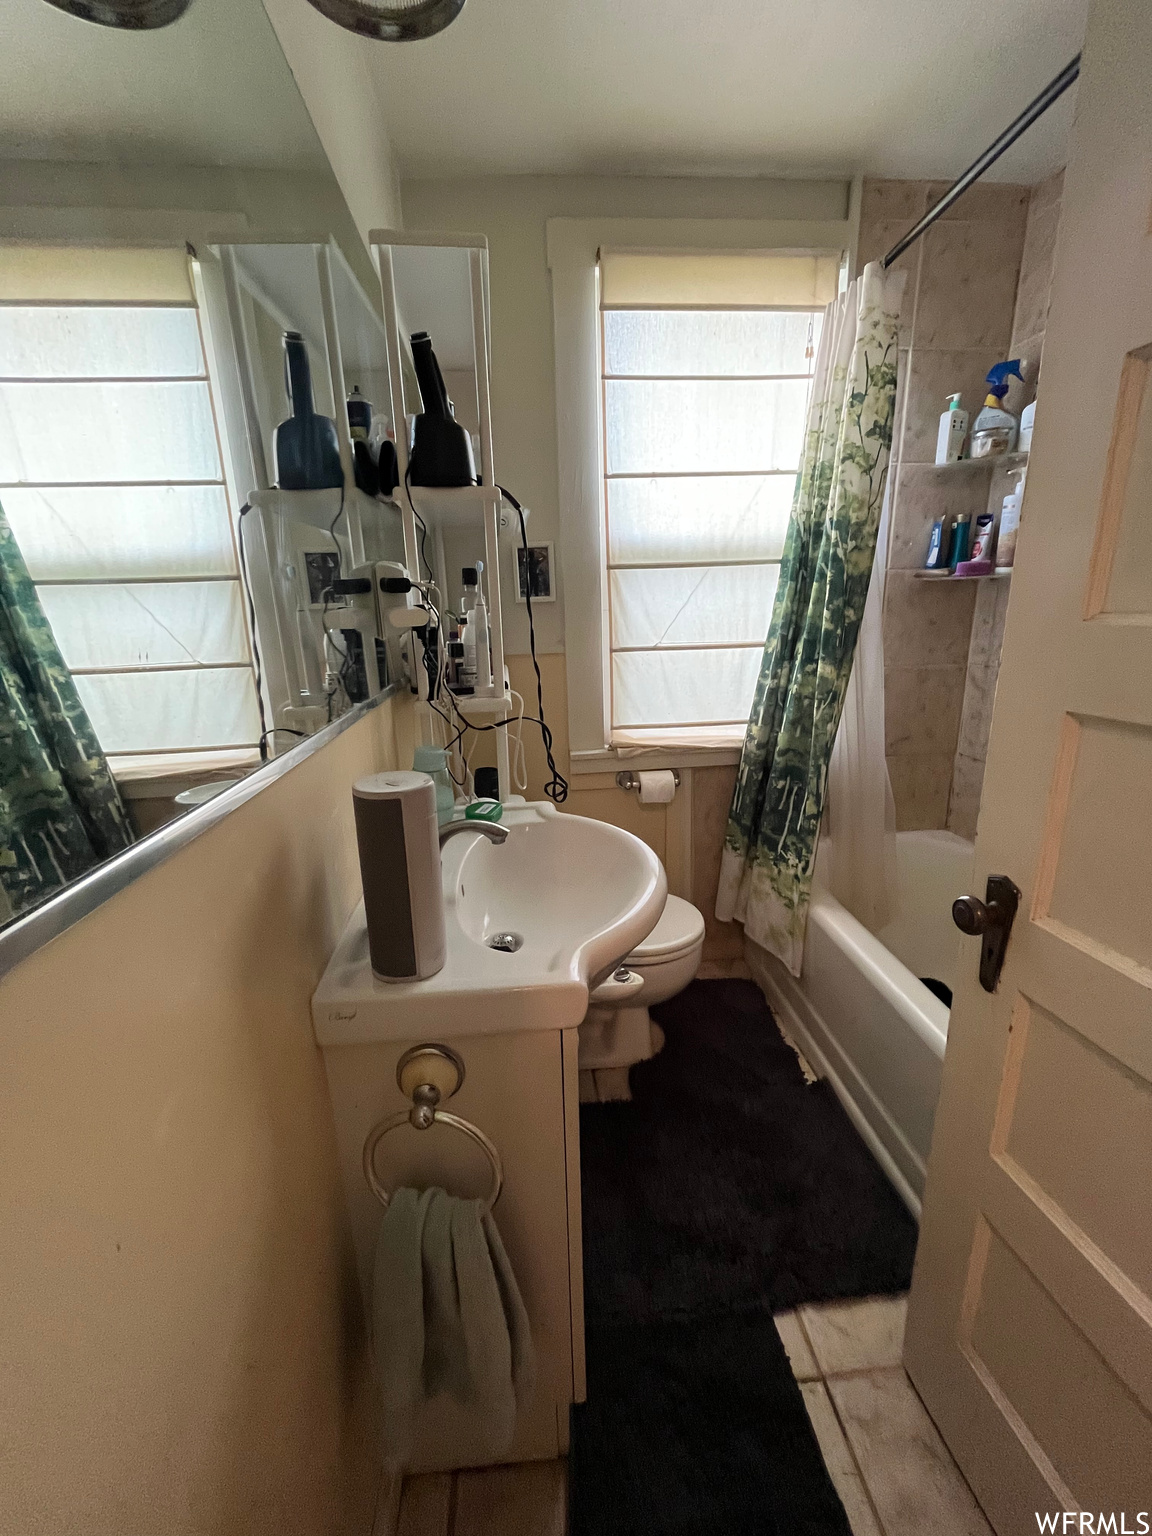 Full bathroom featuring dark tile flooring, shower / tub combo with curtain, mirror, and vanity